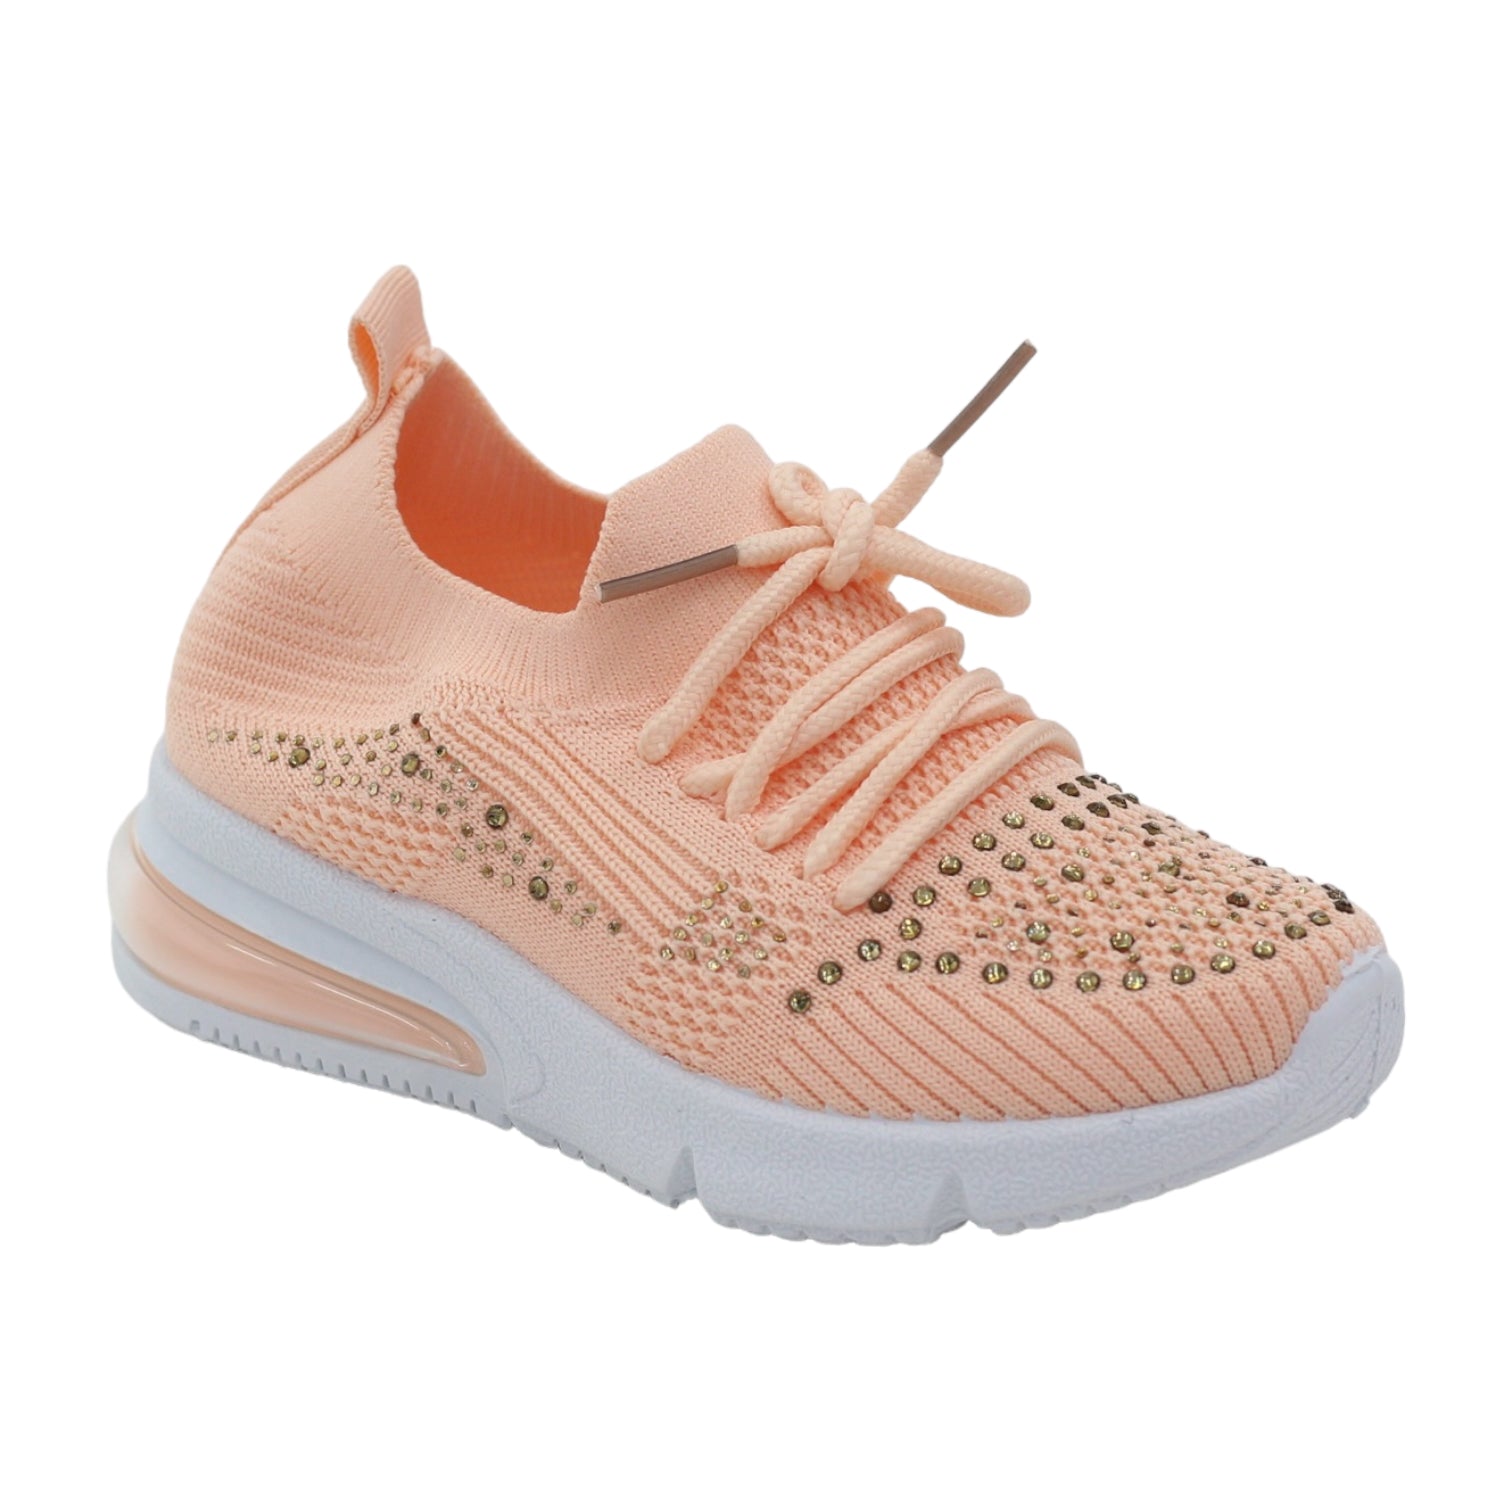 Obioma girls fly knit lace up sneaker with diamonds apricot